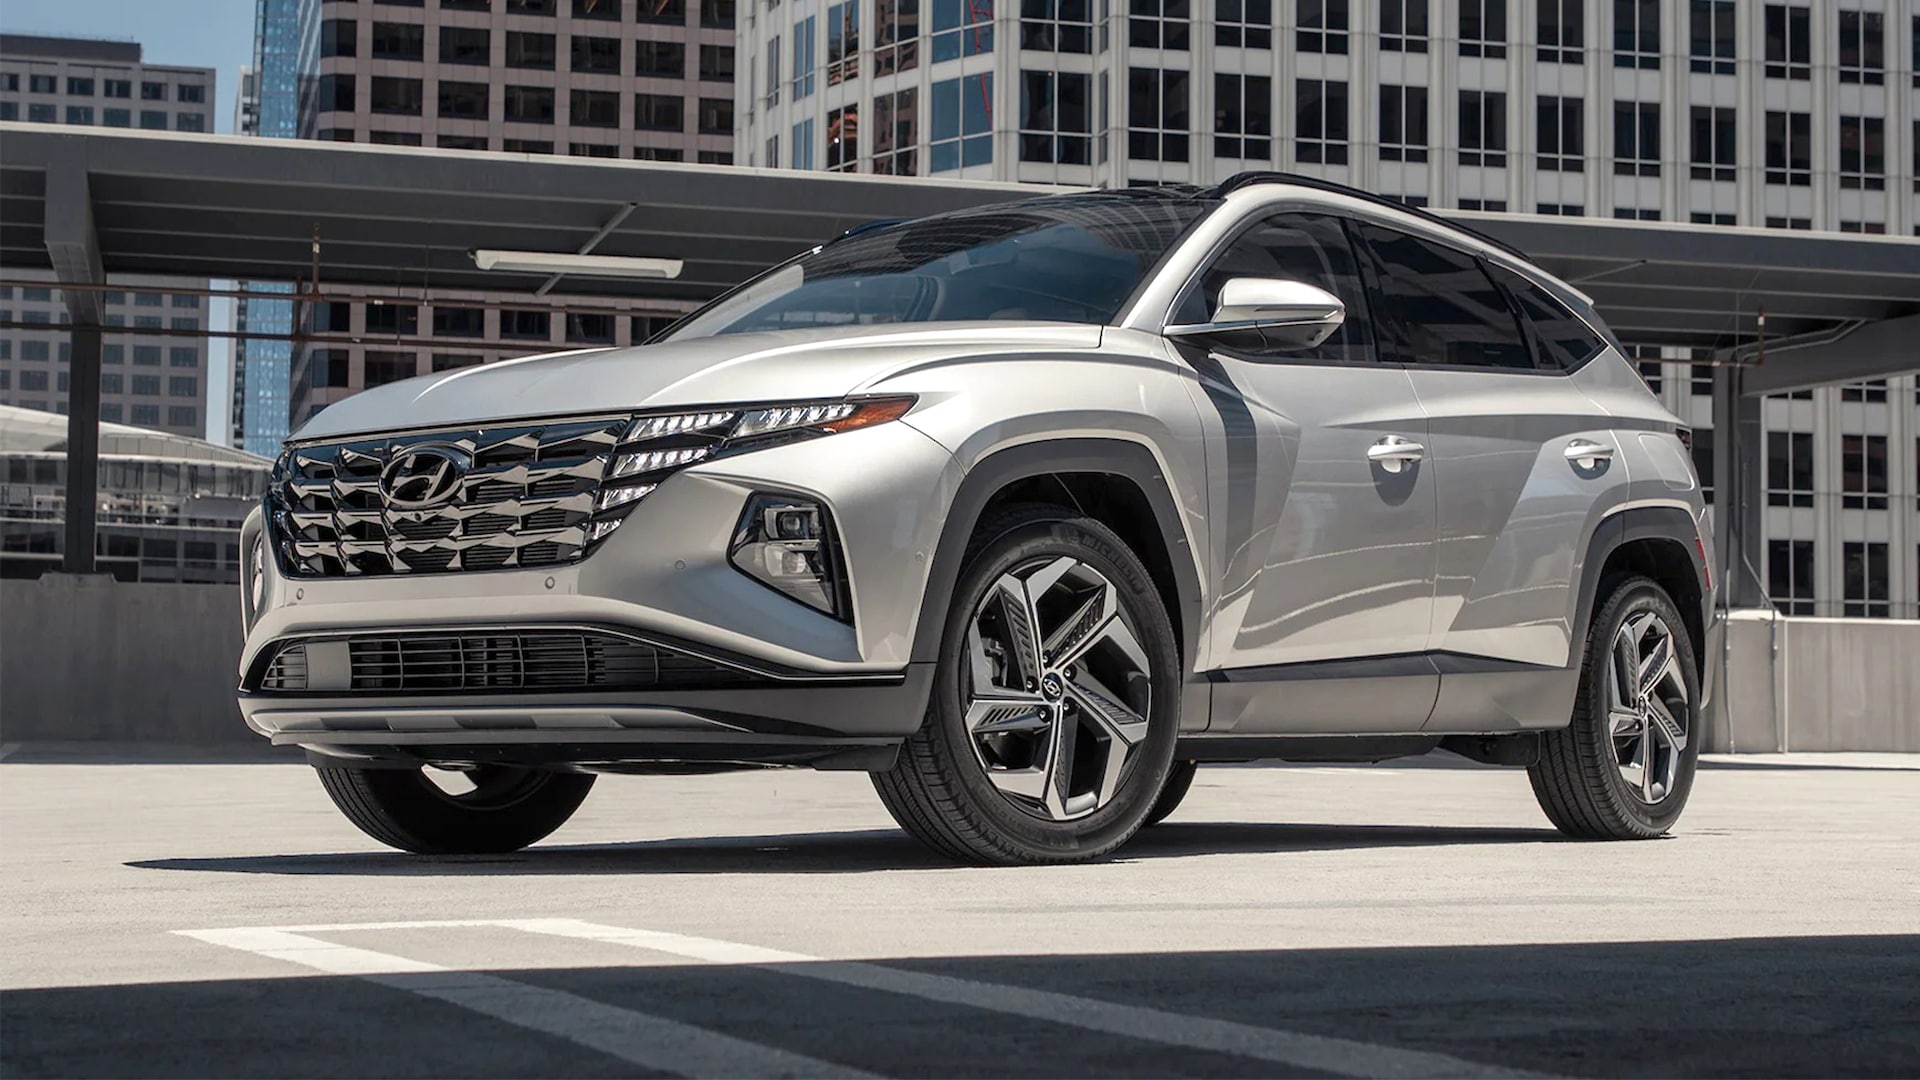 2023 Hyundai Tucson Prices, Reviews, and Photos - MotorTrend